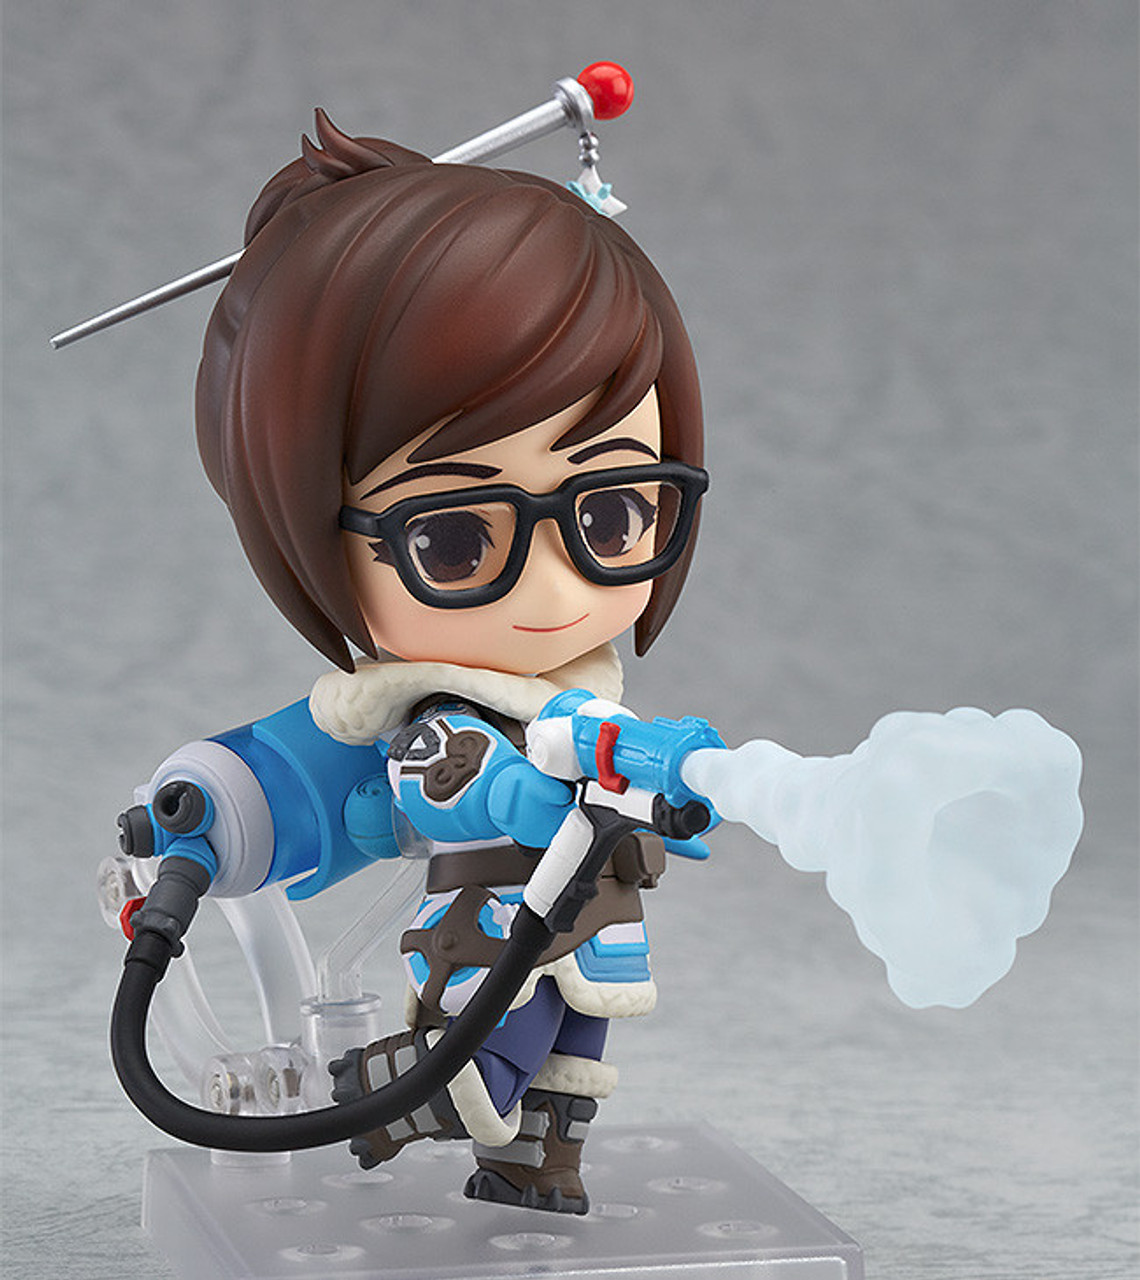 GoodSmile Company Blizzard Overwatch: TRACER (Classic Skin Edition